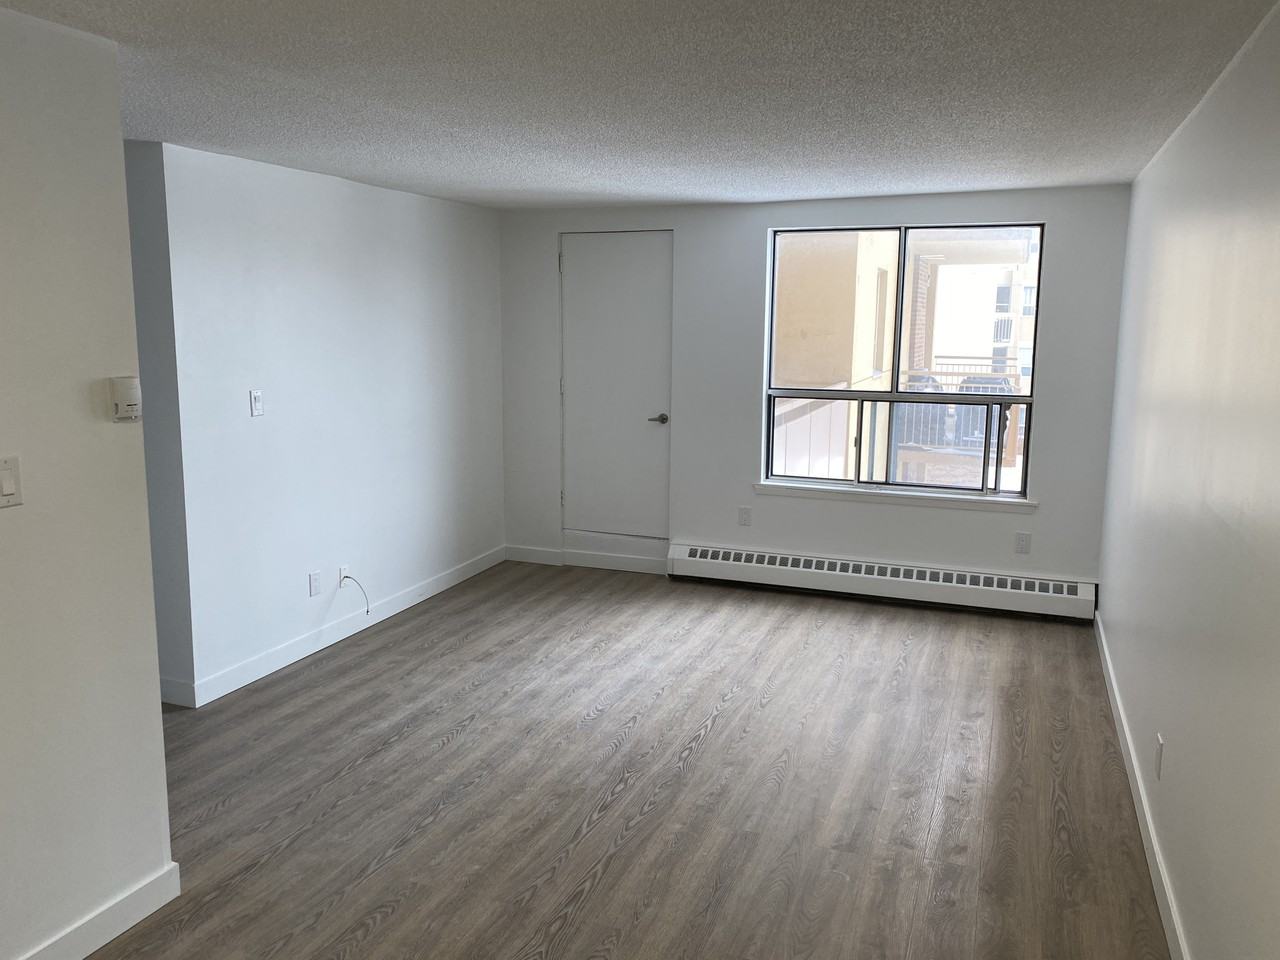 Apartments For Rent in South Gate, CA - 35 Rentals